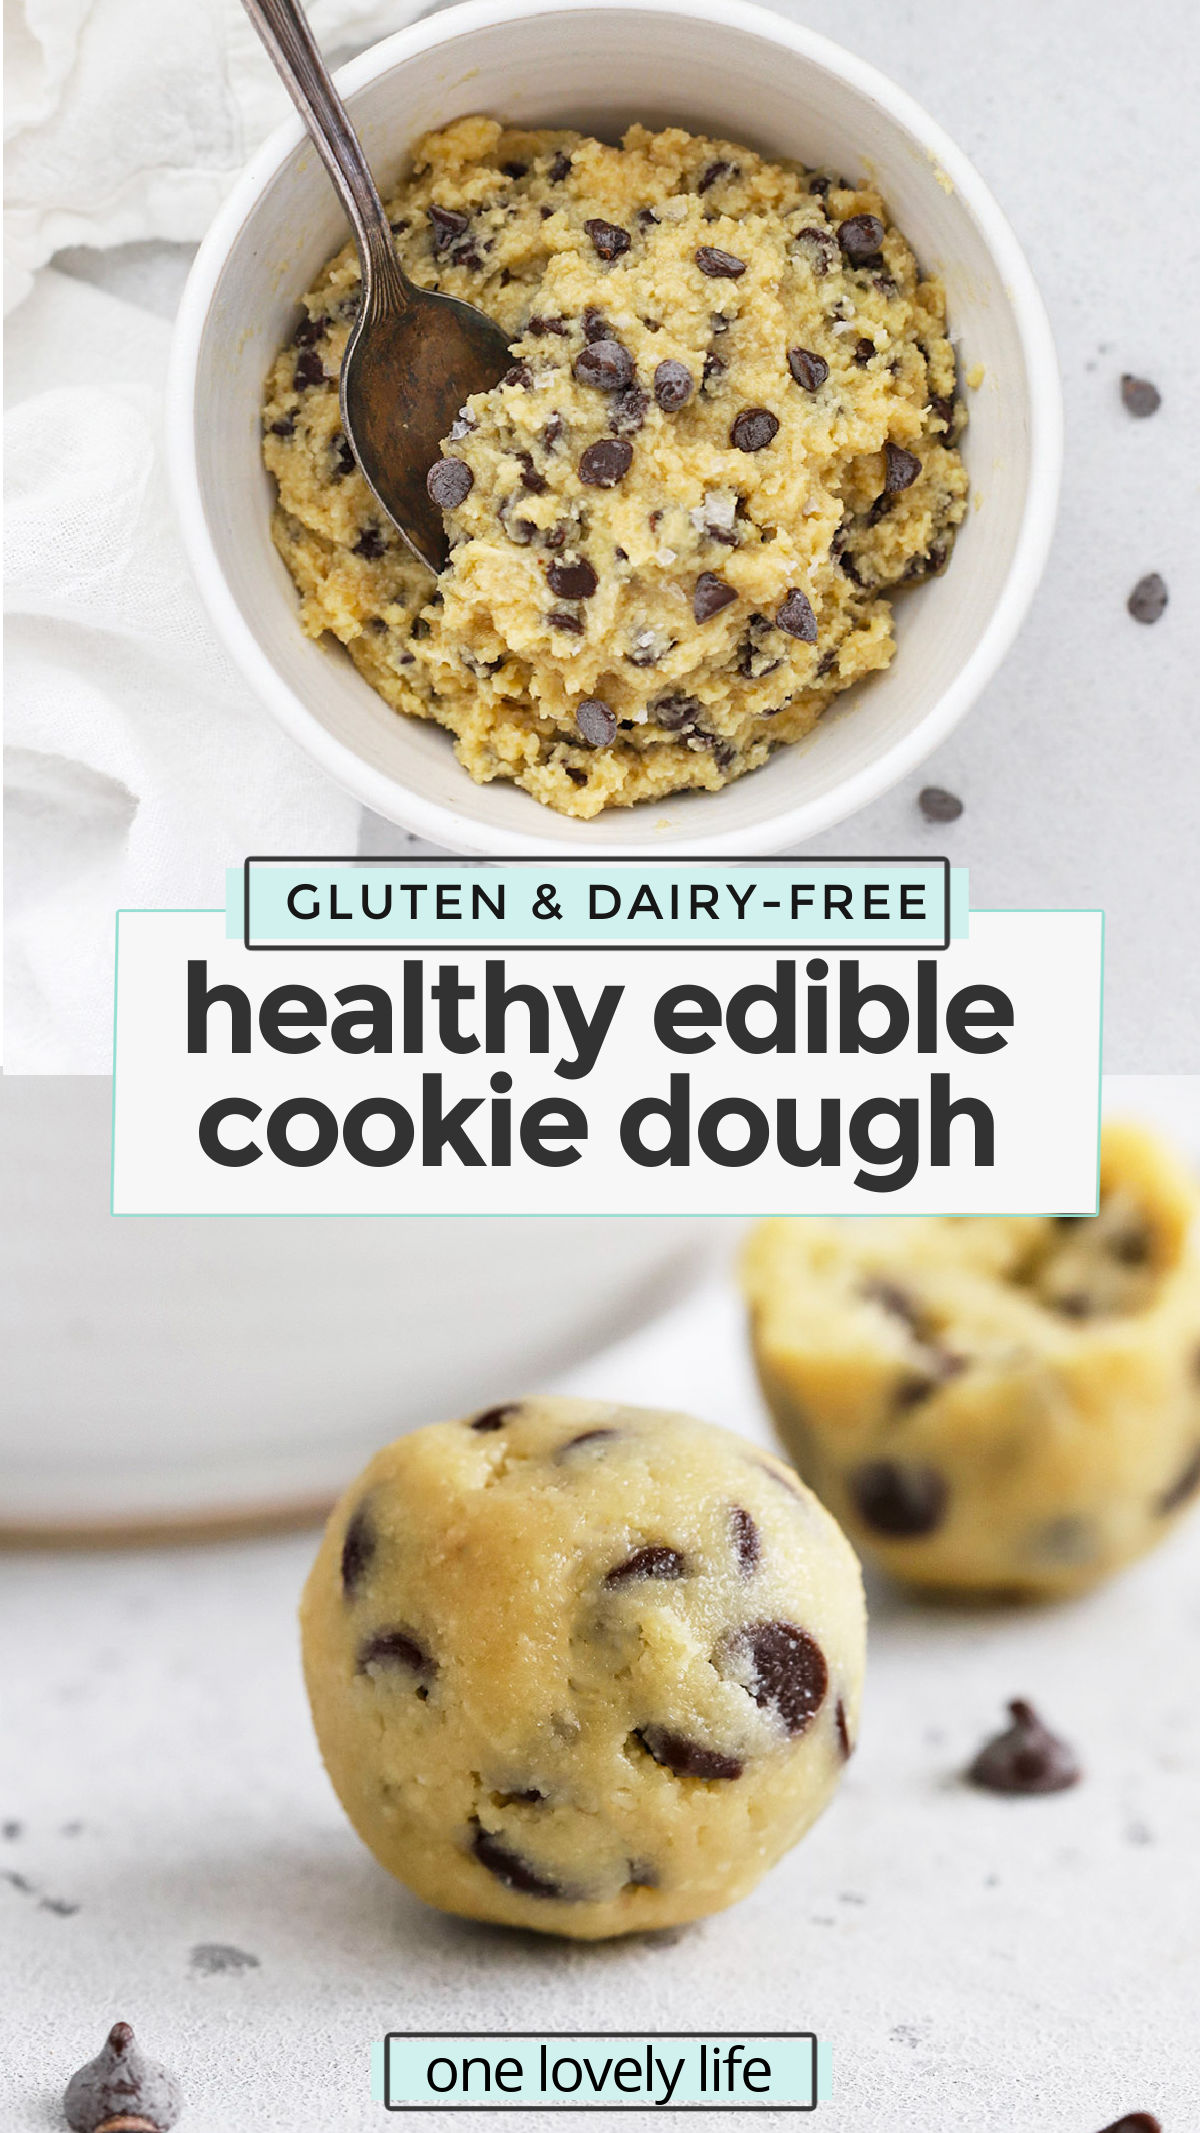 Healthy edible cookie dough? YES PLEASE! This almond flour cookie dough recipe is easy + delicious. The perfect no-bake treat to keep on hand! (Gluten-free, paleo, vegan-friendly) // Almond Flour Cookie Dough // Paleo Edible Cookie Dough // Vegan Edible Cookie Dough // Gluten Free Edible Cookie Dough #almondflour #healthytreat #glutenfree #vegetarian #vegan #cookiedough #paleo